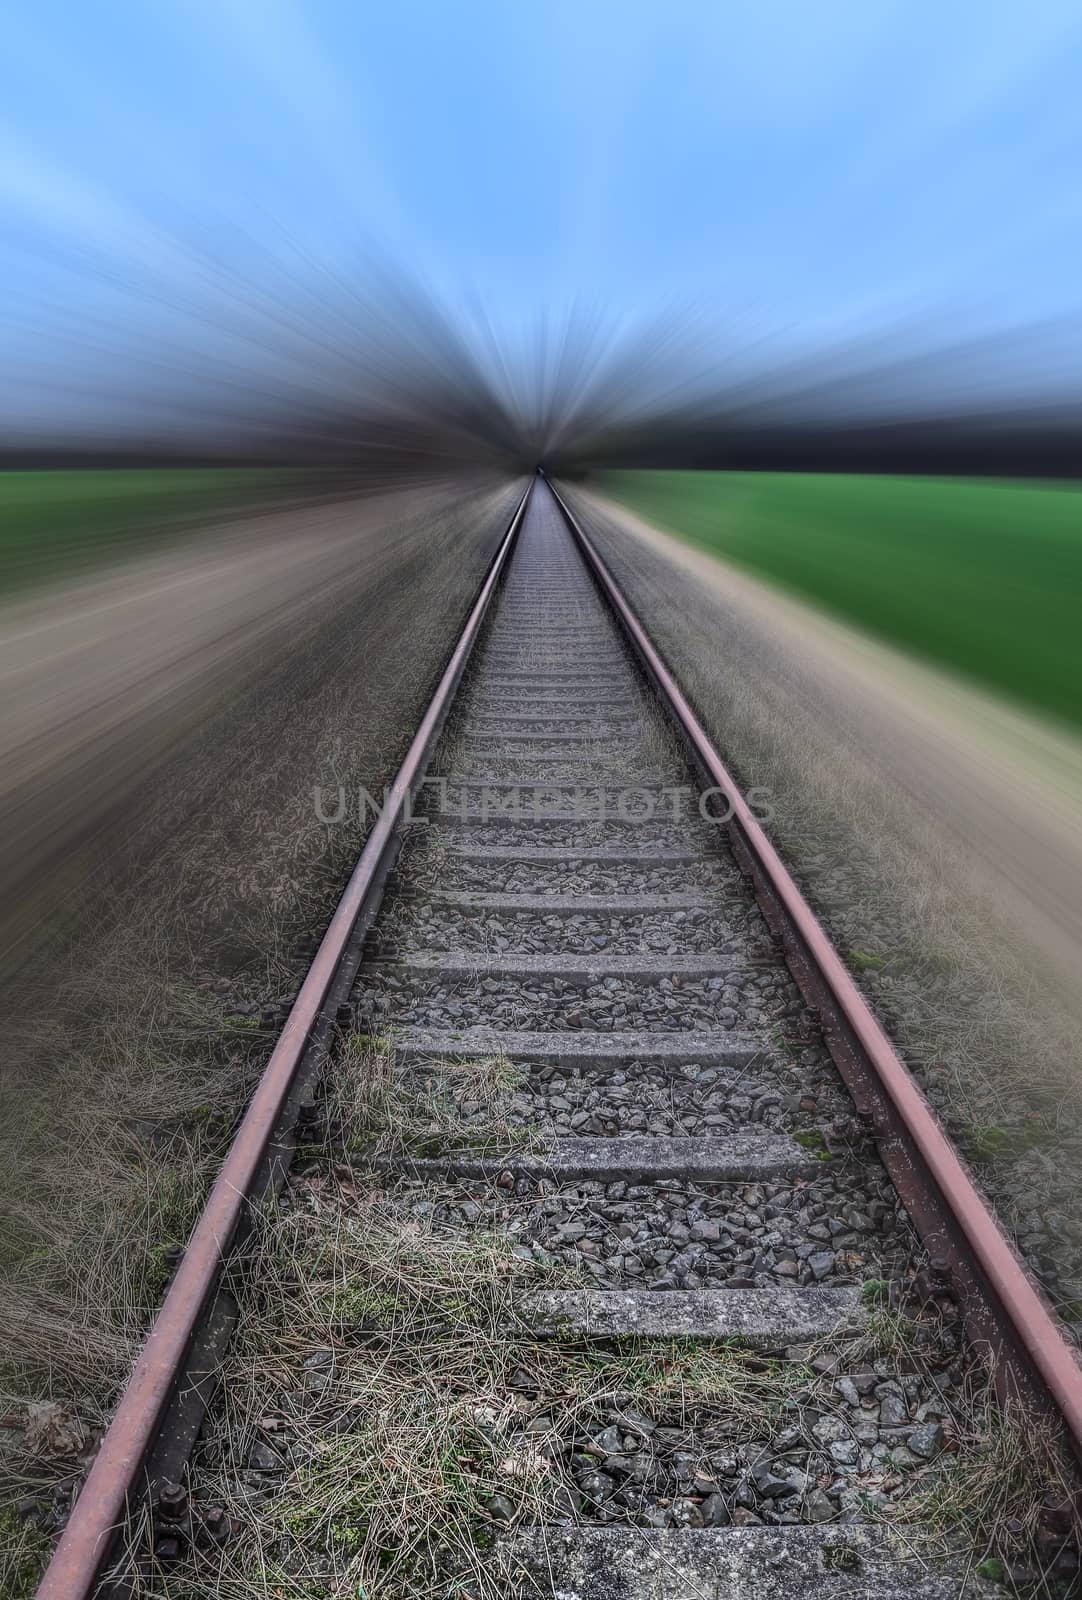 Diminishing perspective view at a railroad track with a high spe by MP_foto71